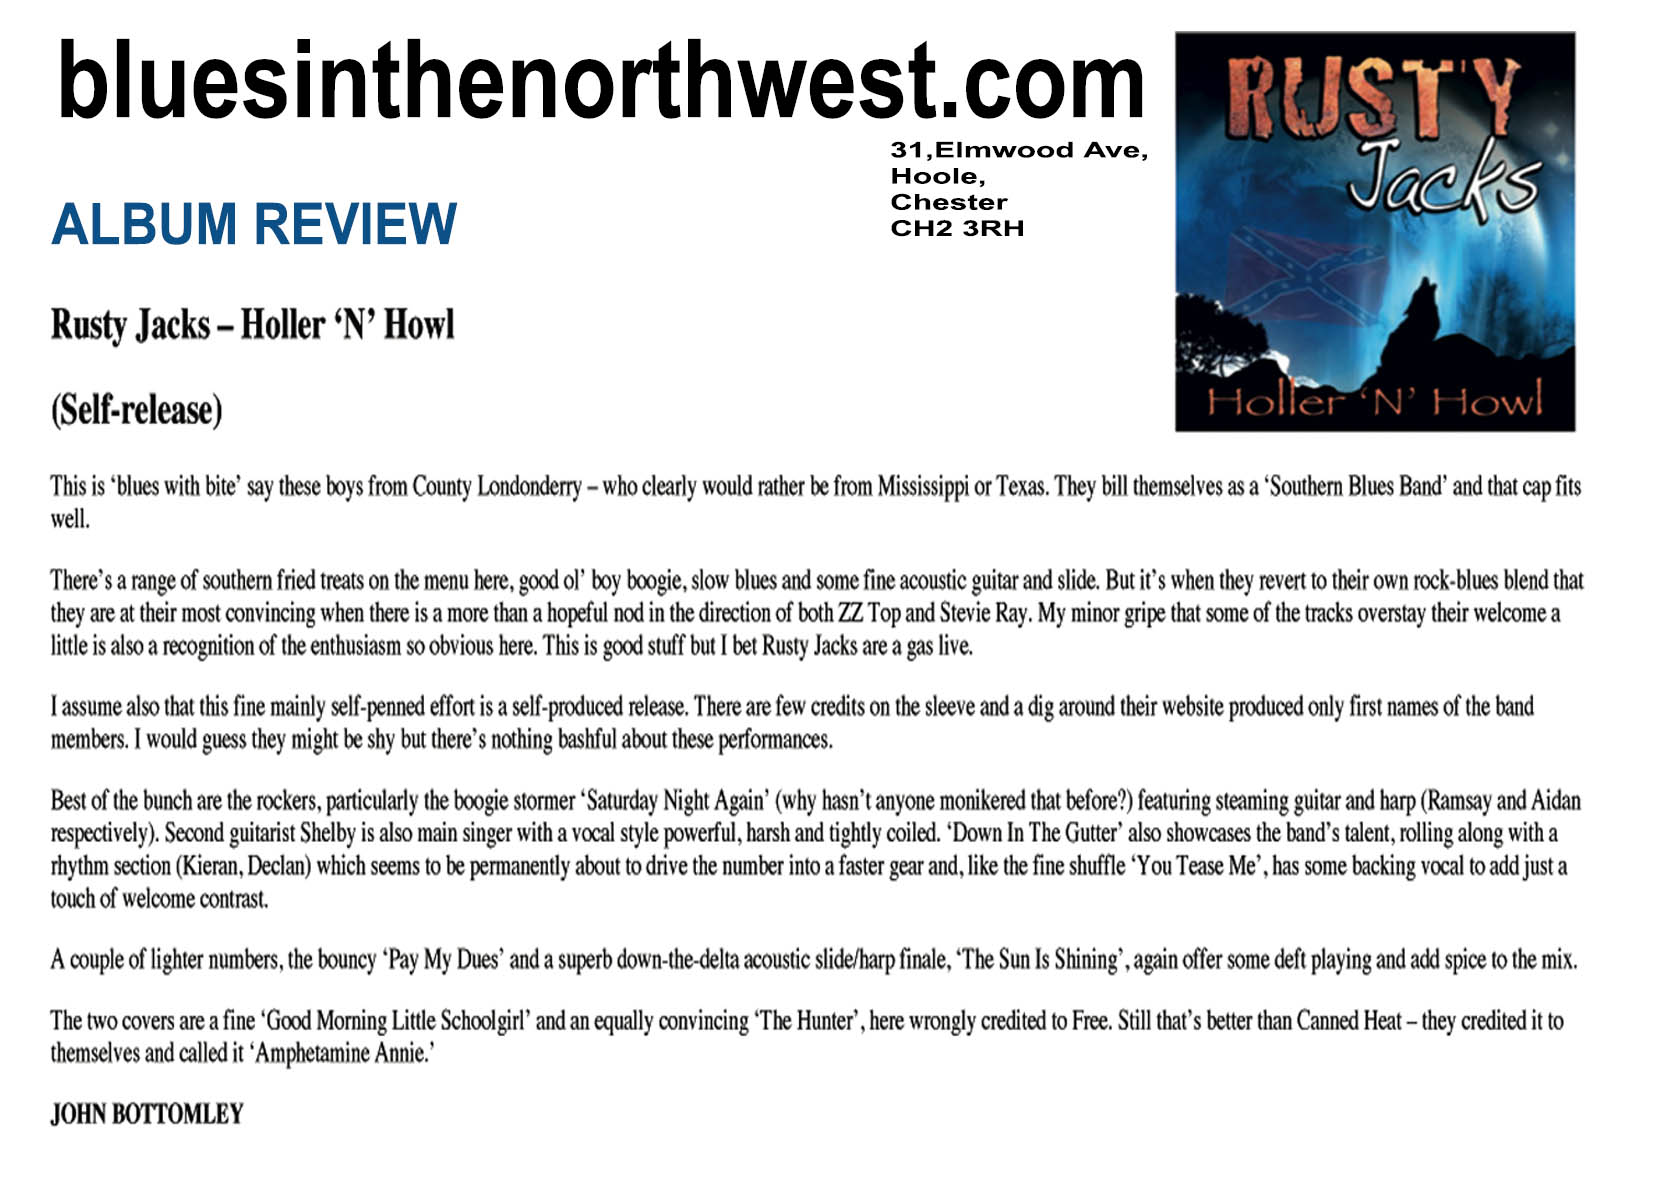 BLUES IN THE NORTHWEST -ALBUM REVIEW